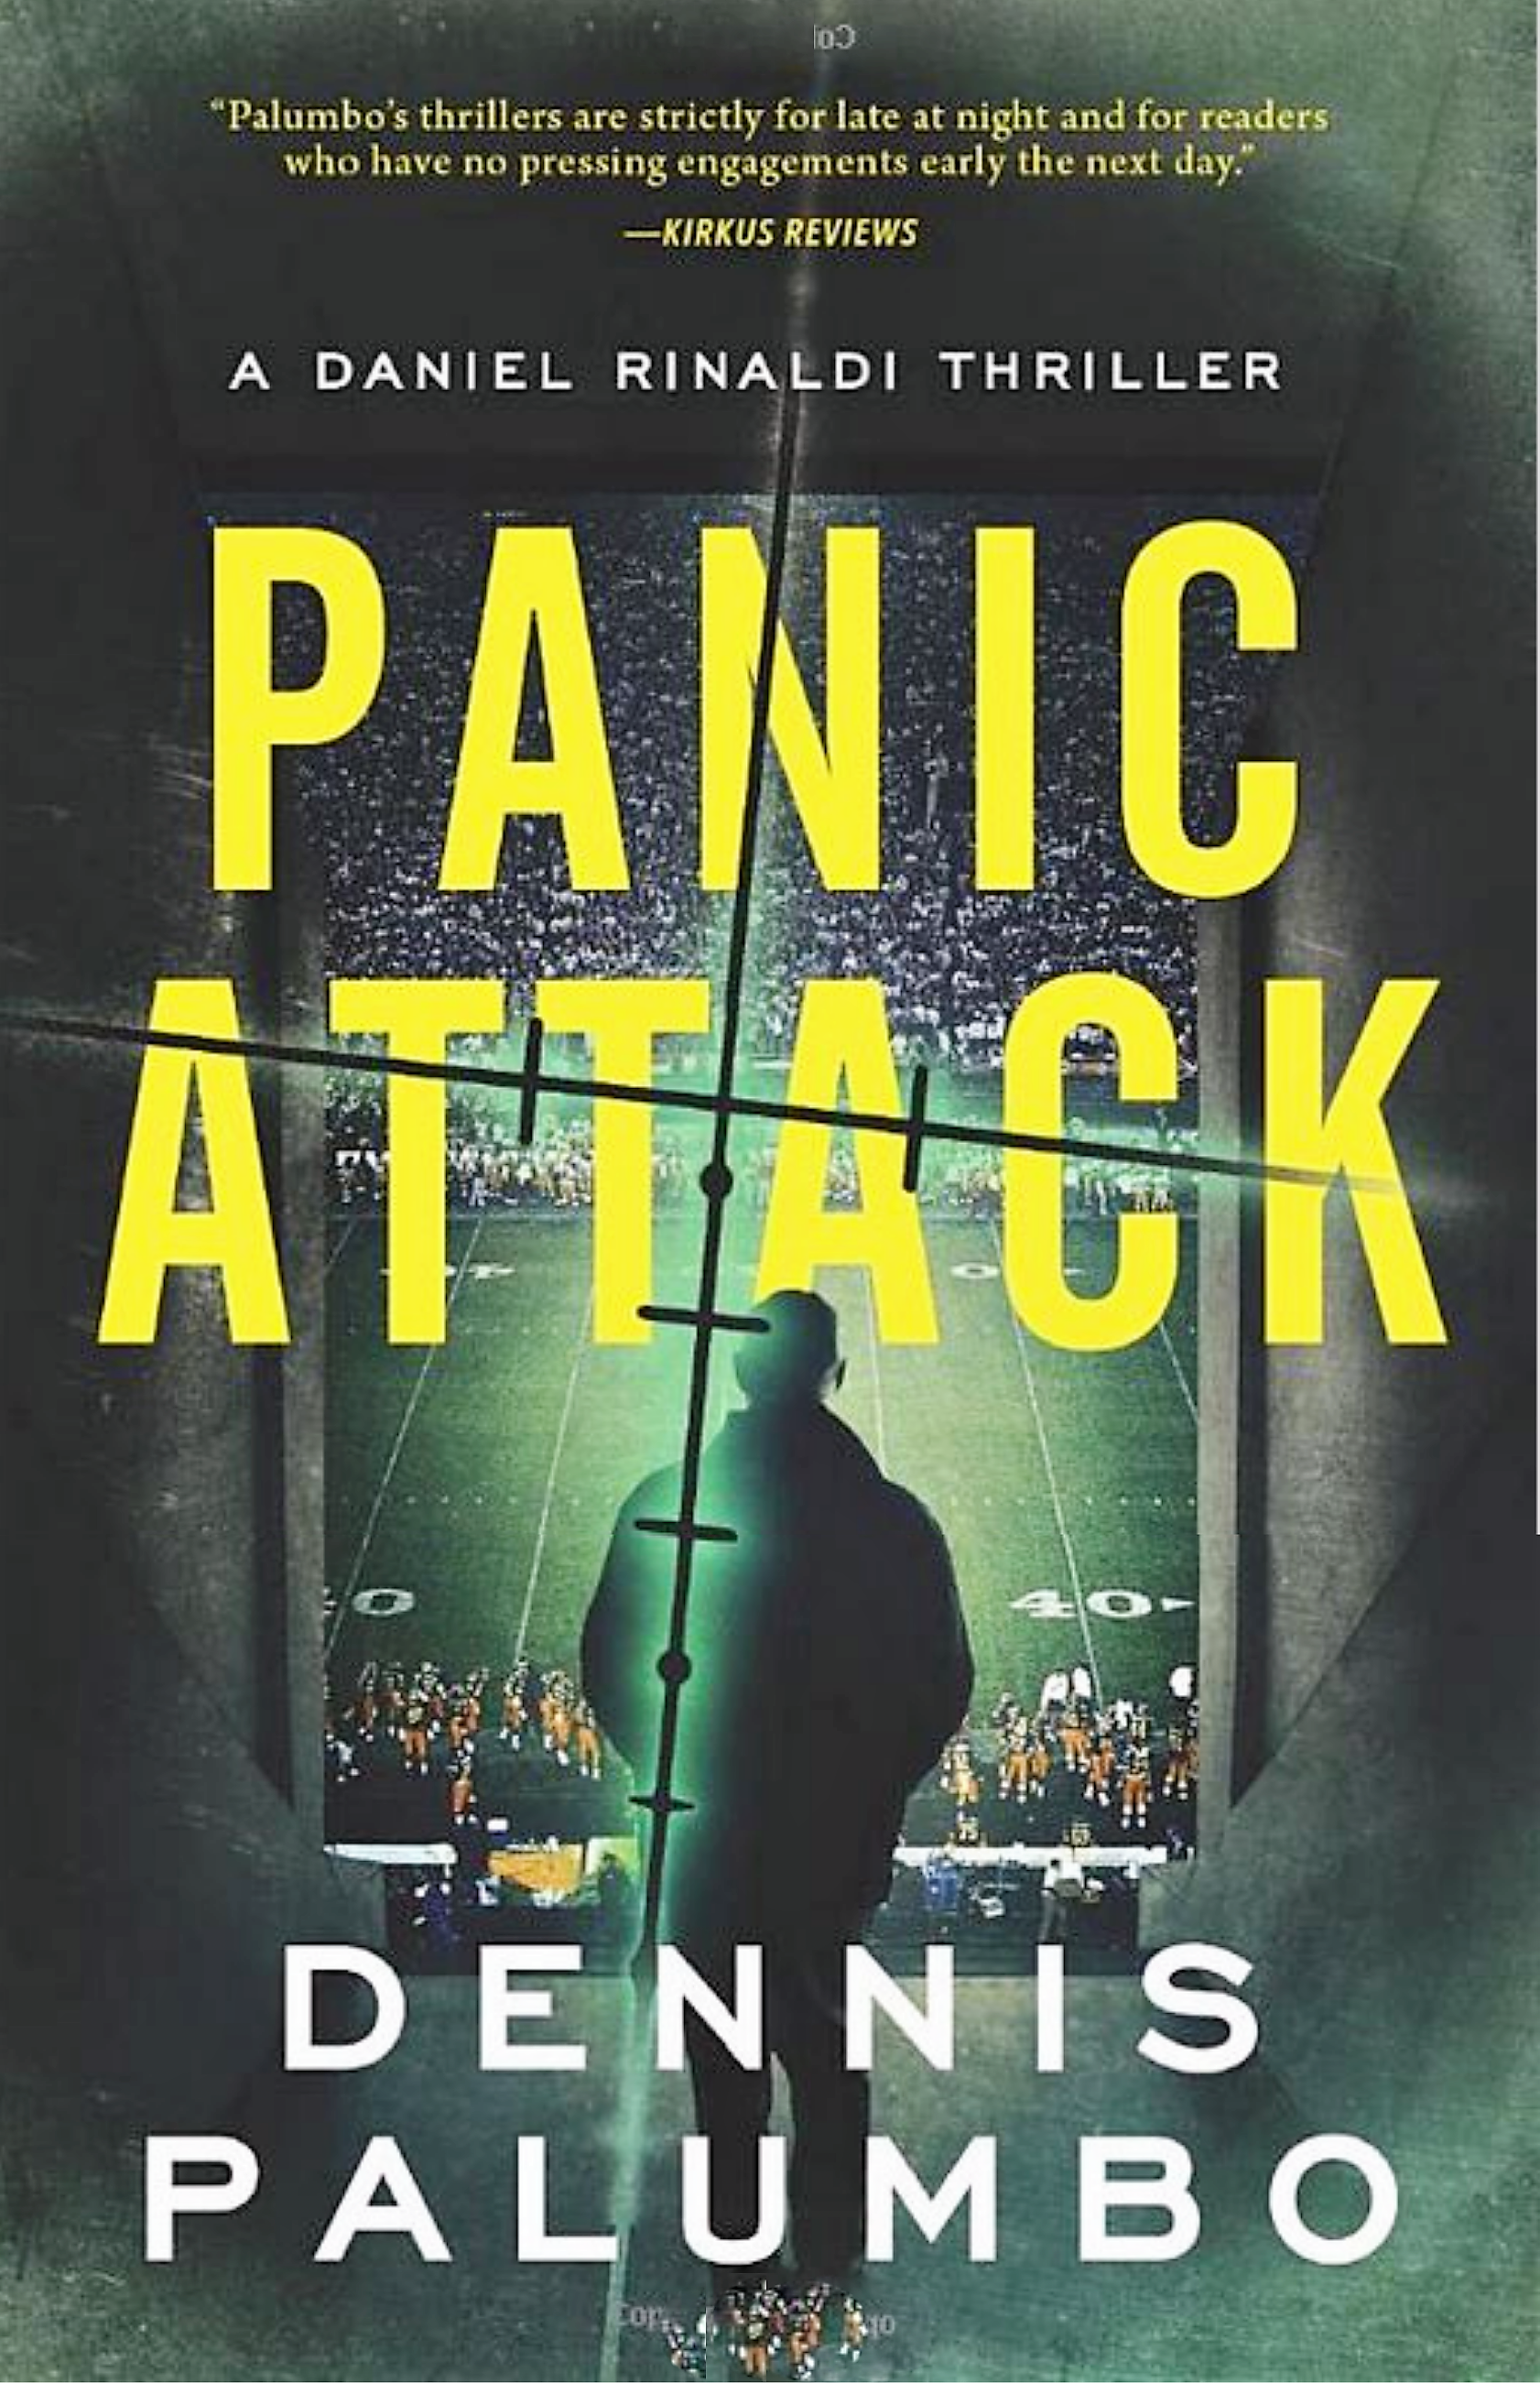 Dennis Palumbo's Panic Attack book cover image